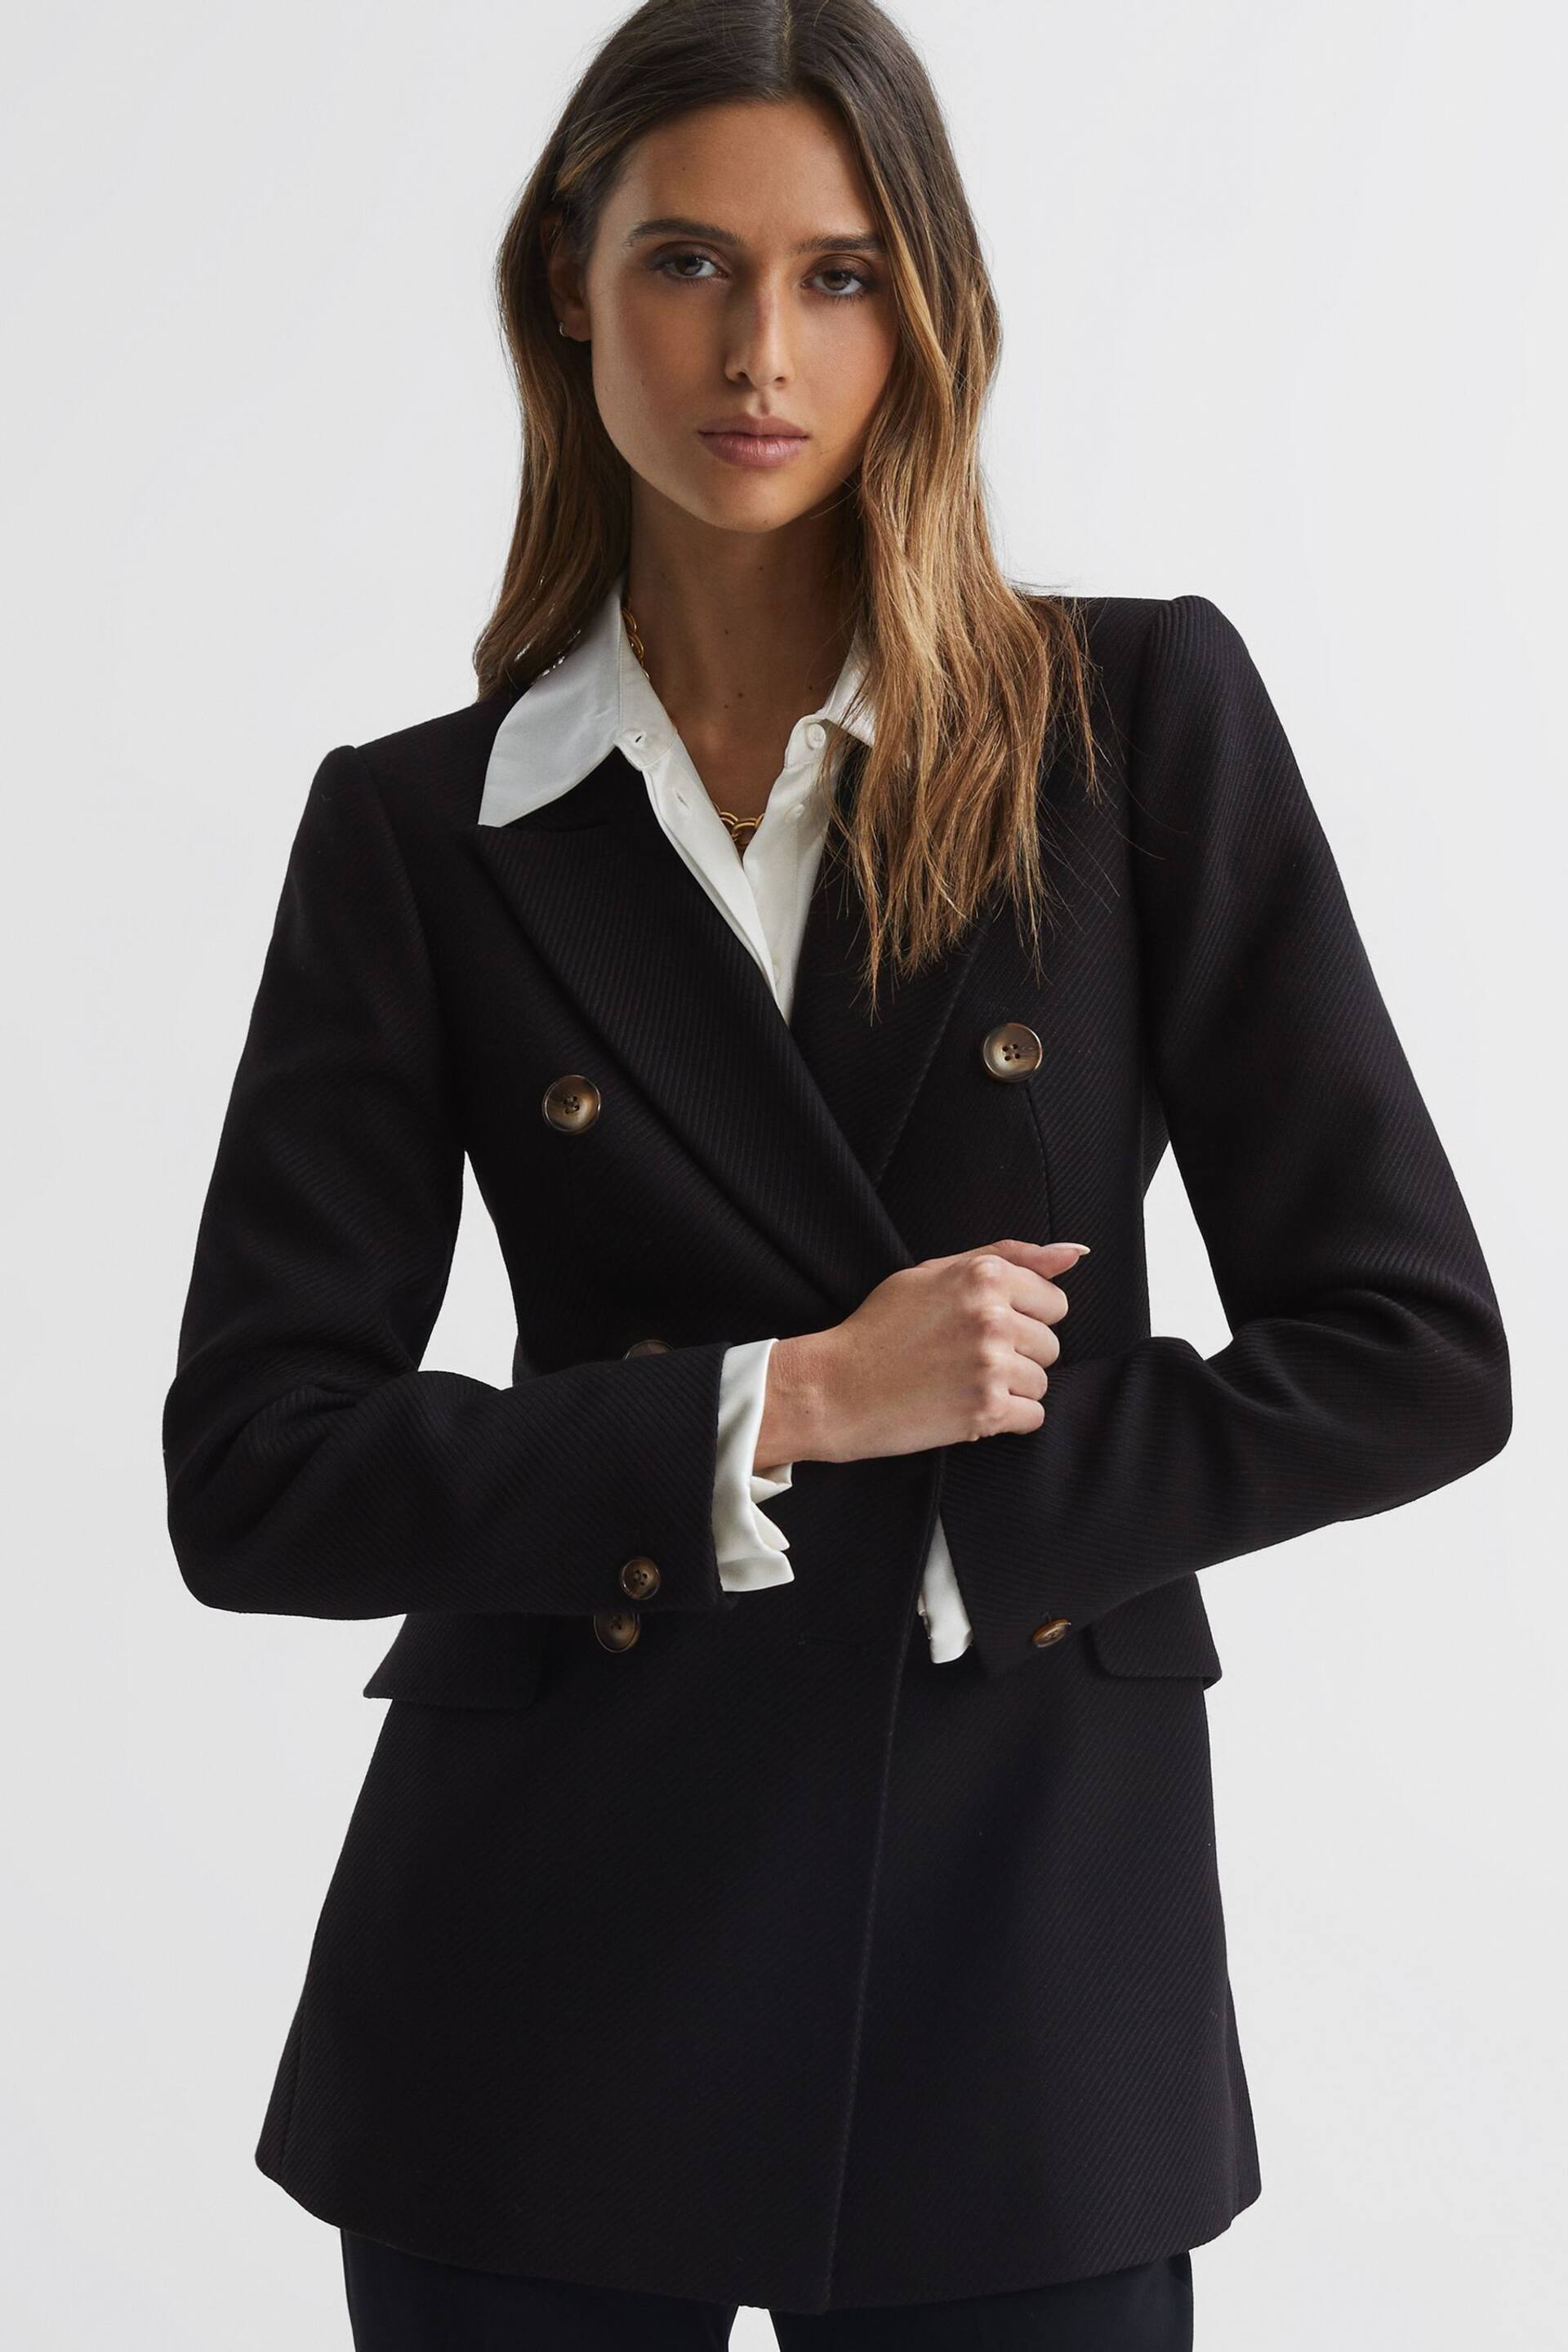 Reiss Black Laura Double Breasted Twill Blazer - Image 6 of 11